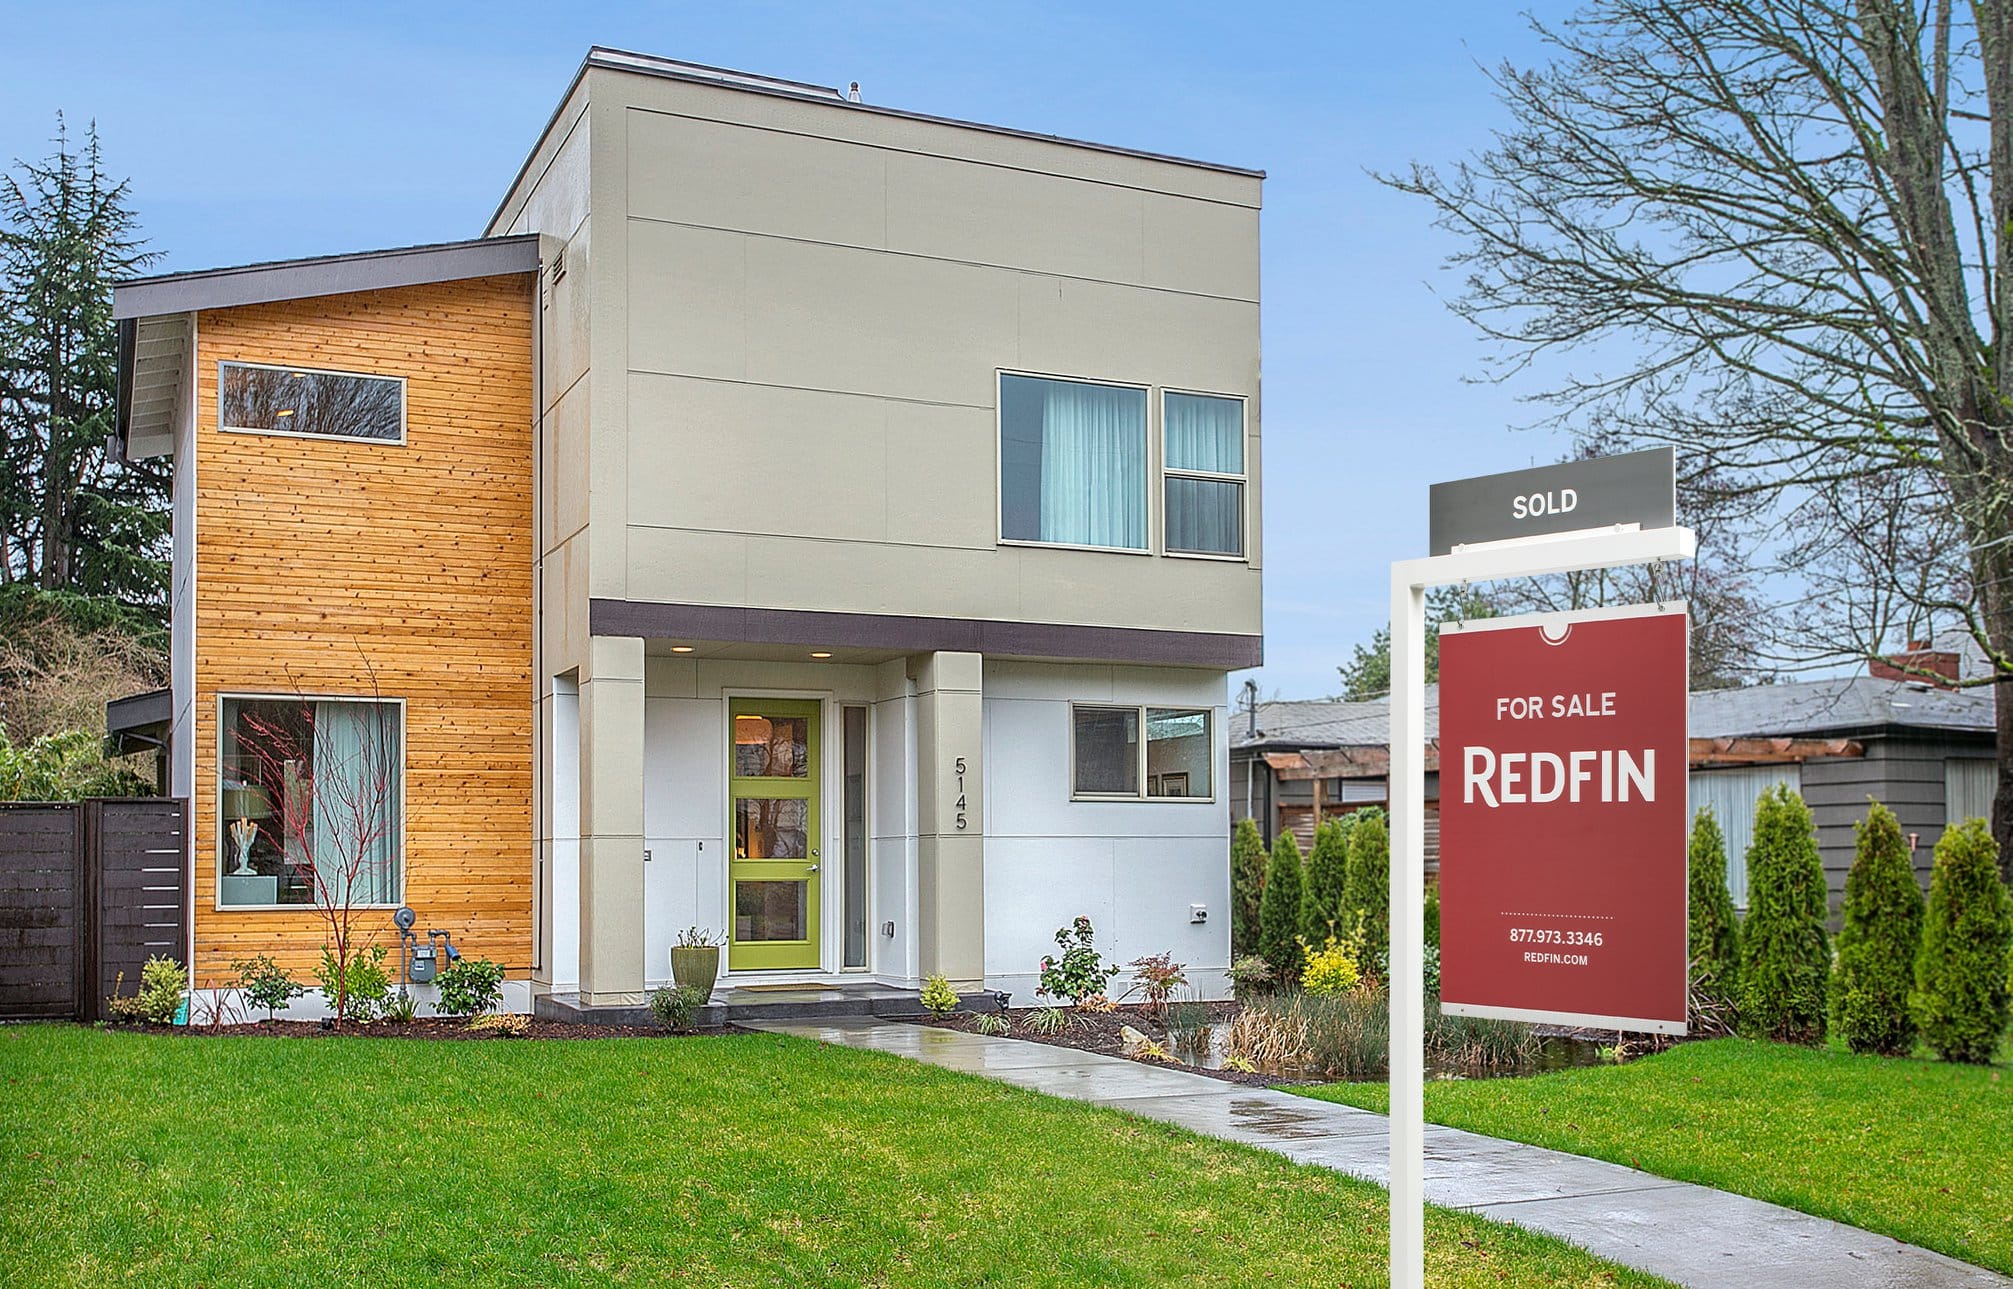 Sam Wilson Featured in Redfin Home Security Article